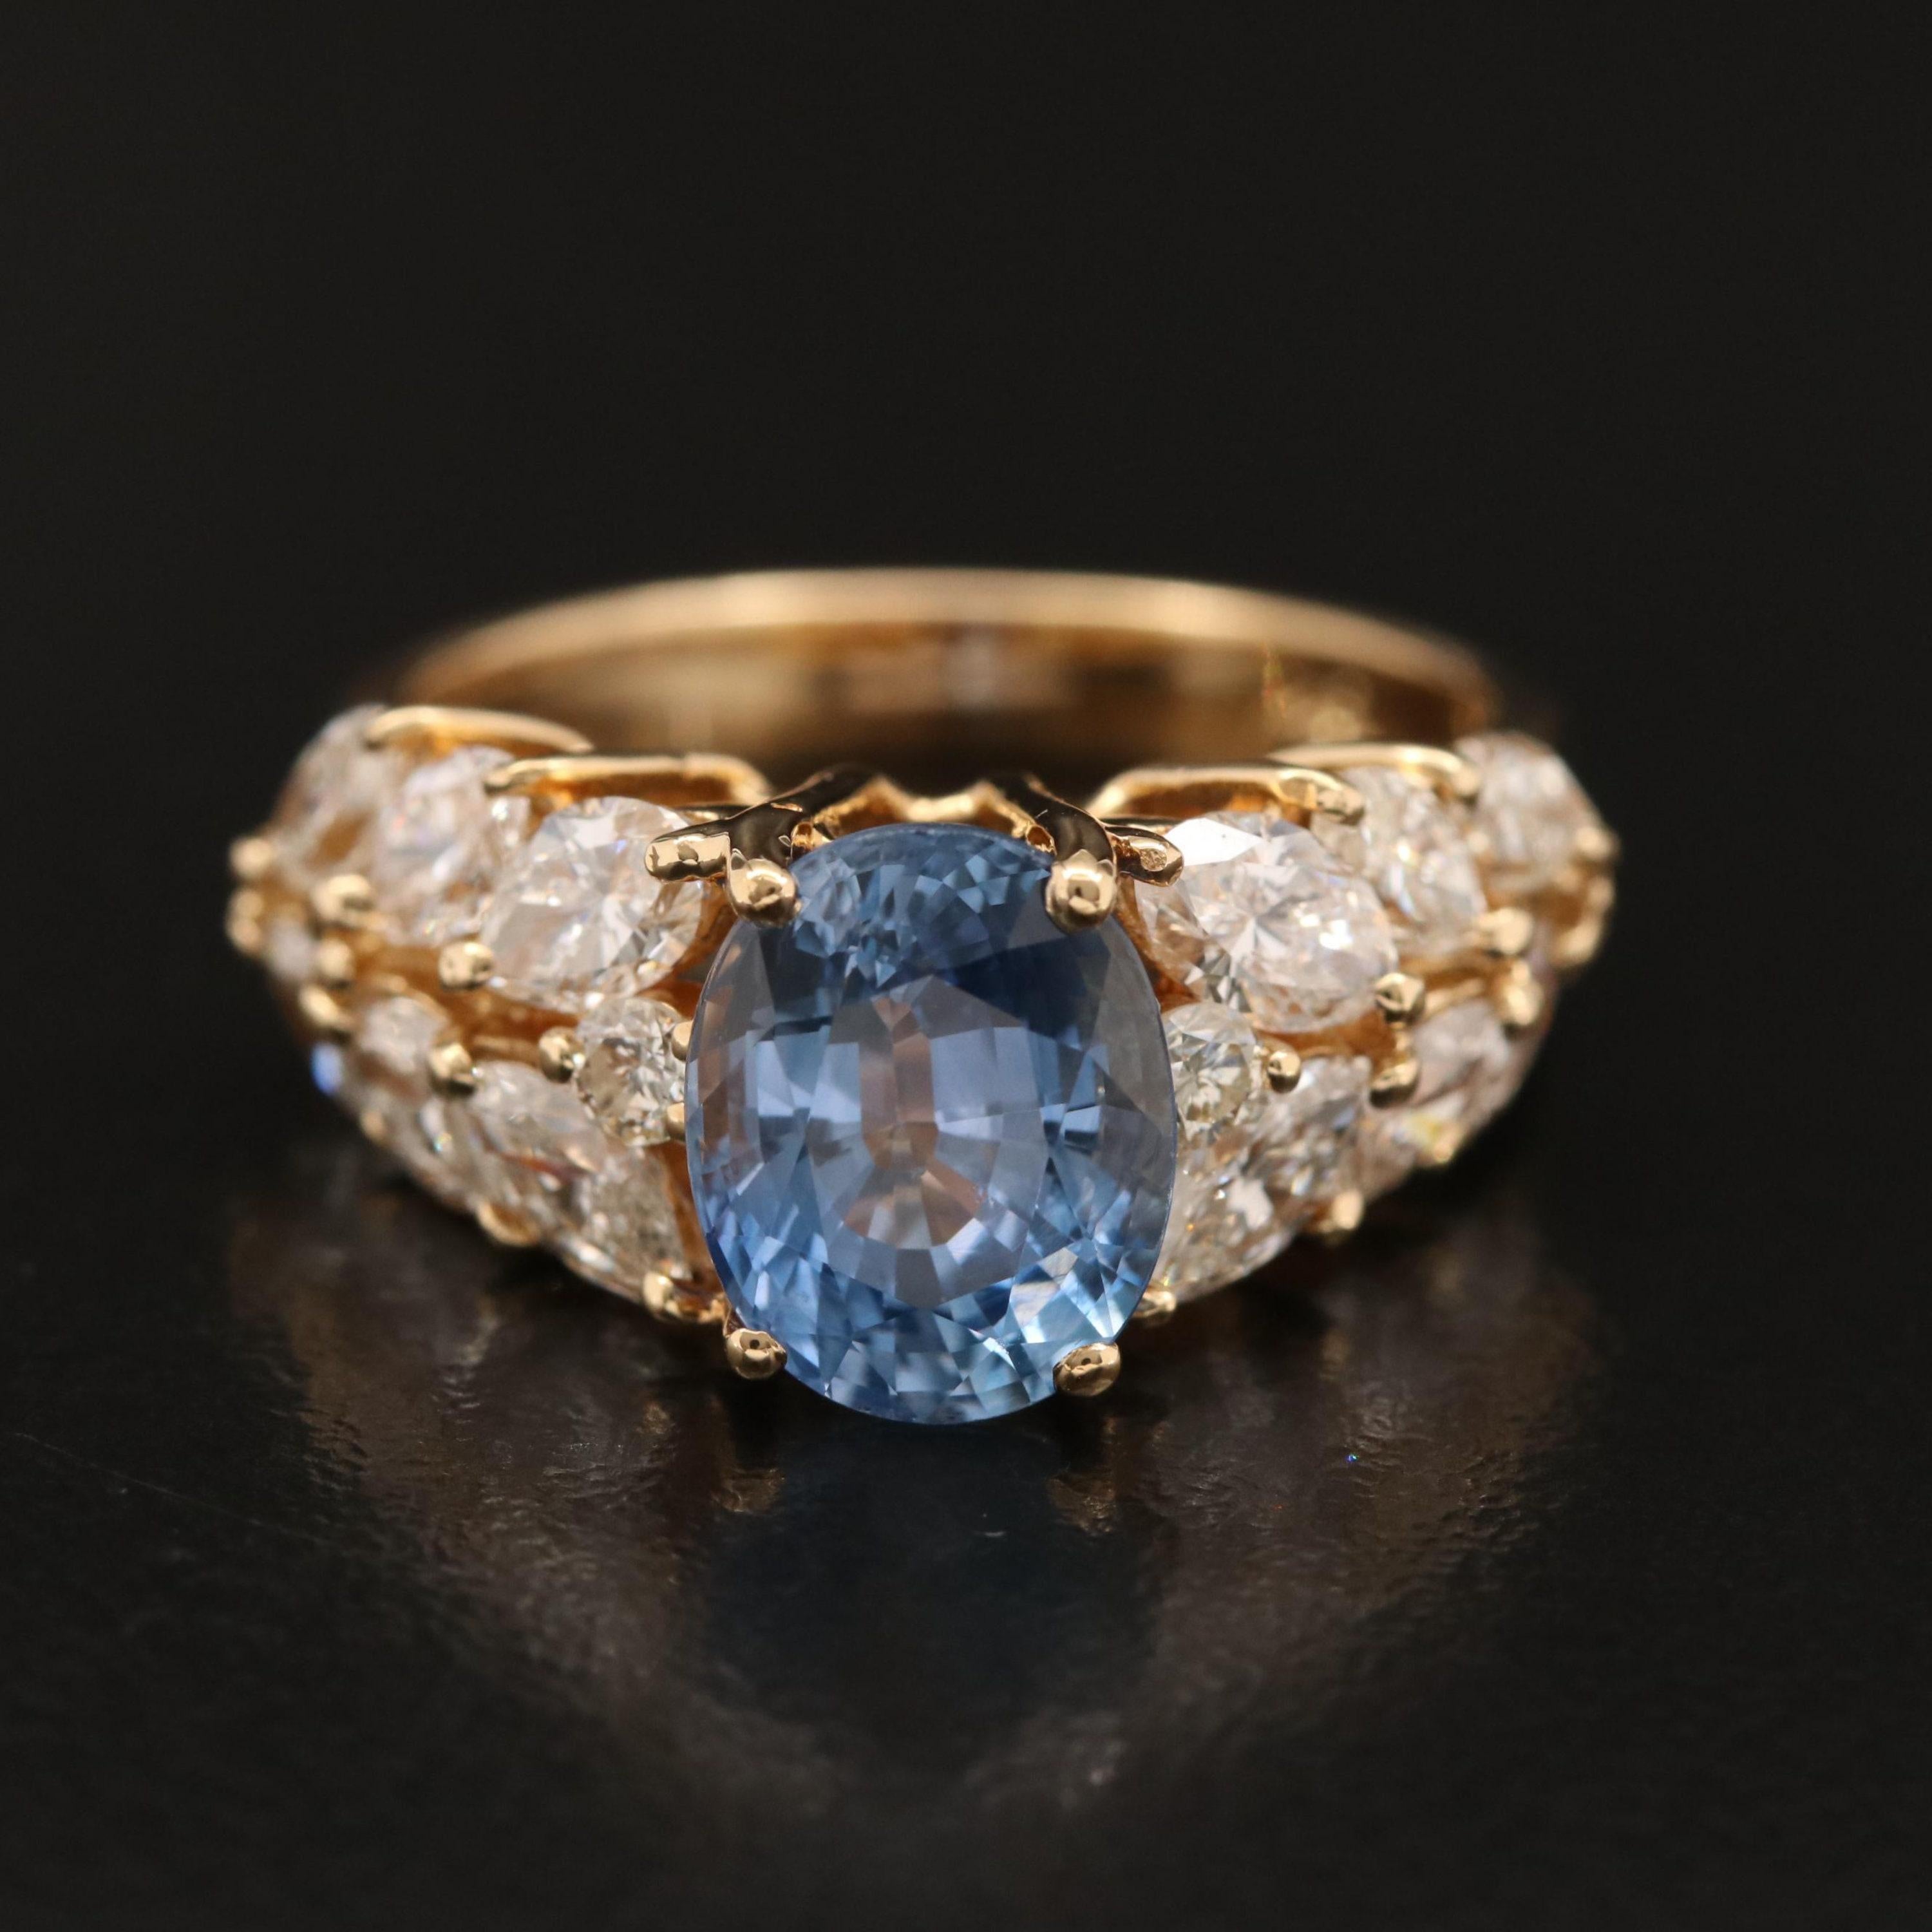 For Sale:  3 Carat Natural Sapphire Diamond Engagement Ring Set in 18K Gold, Cocktail Ring 6